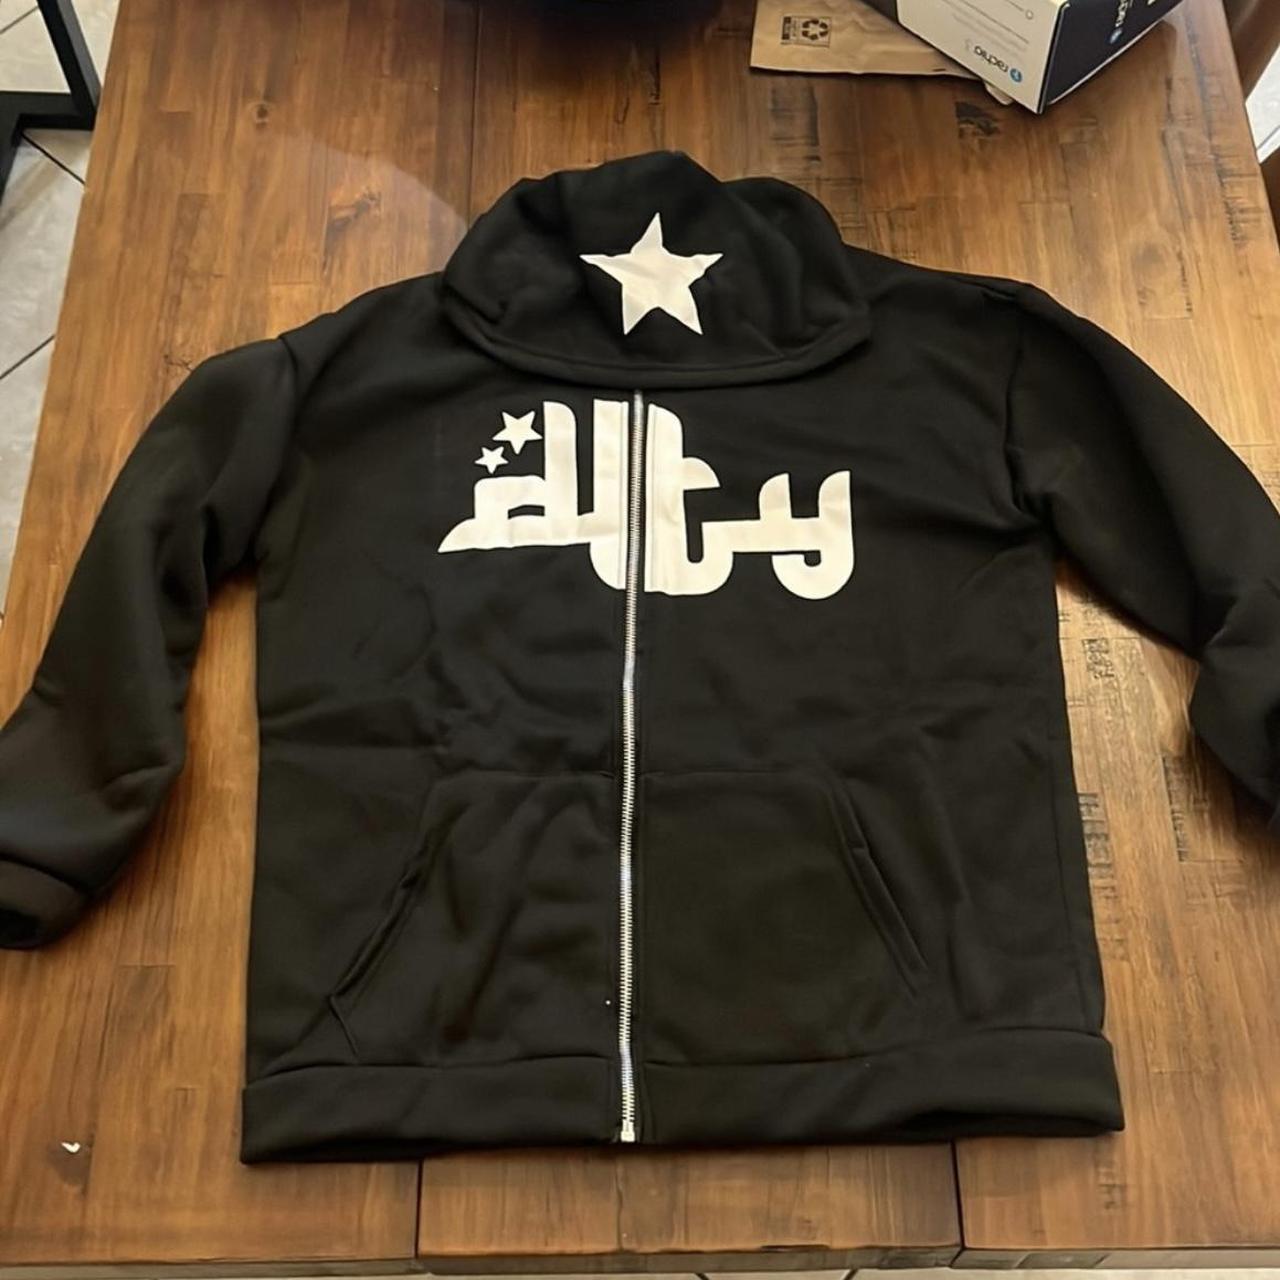 dty hoodie size S can’t confirm authenticity hmu w... - Depop